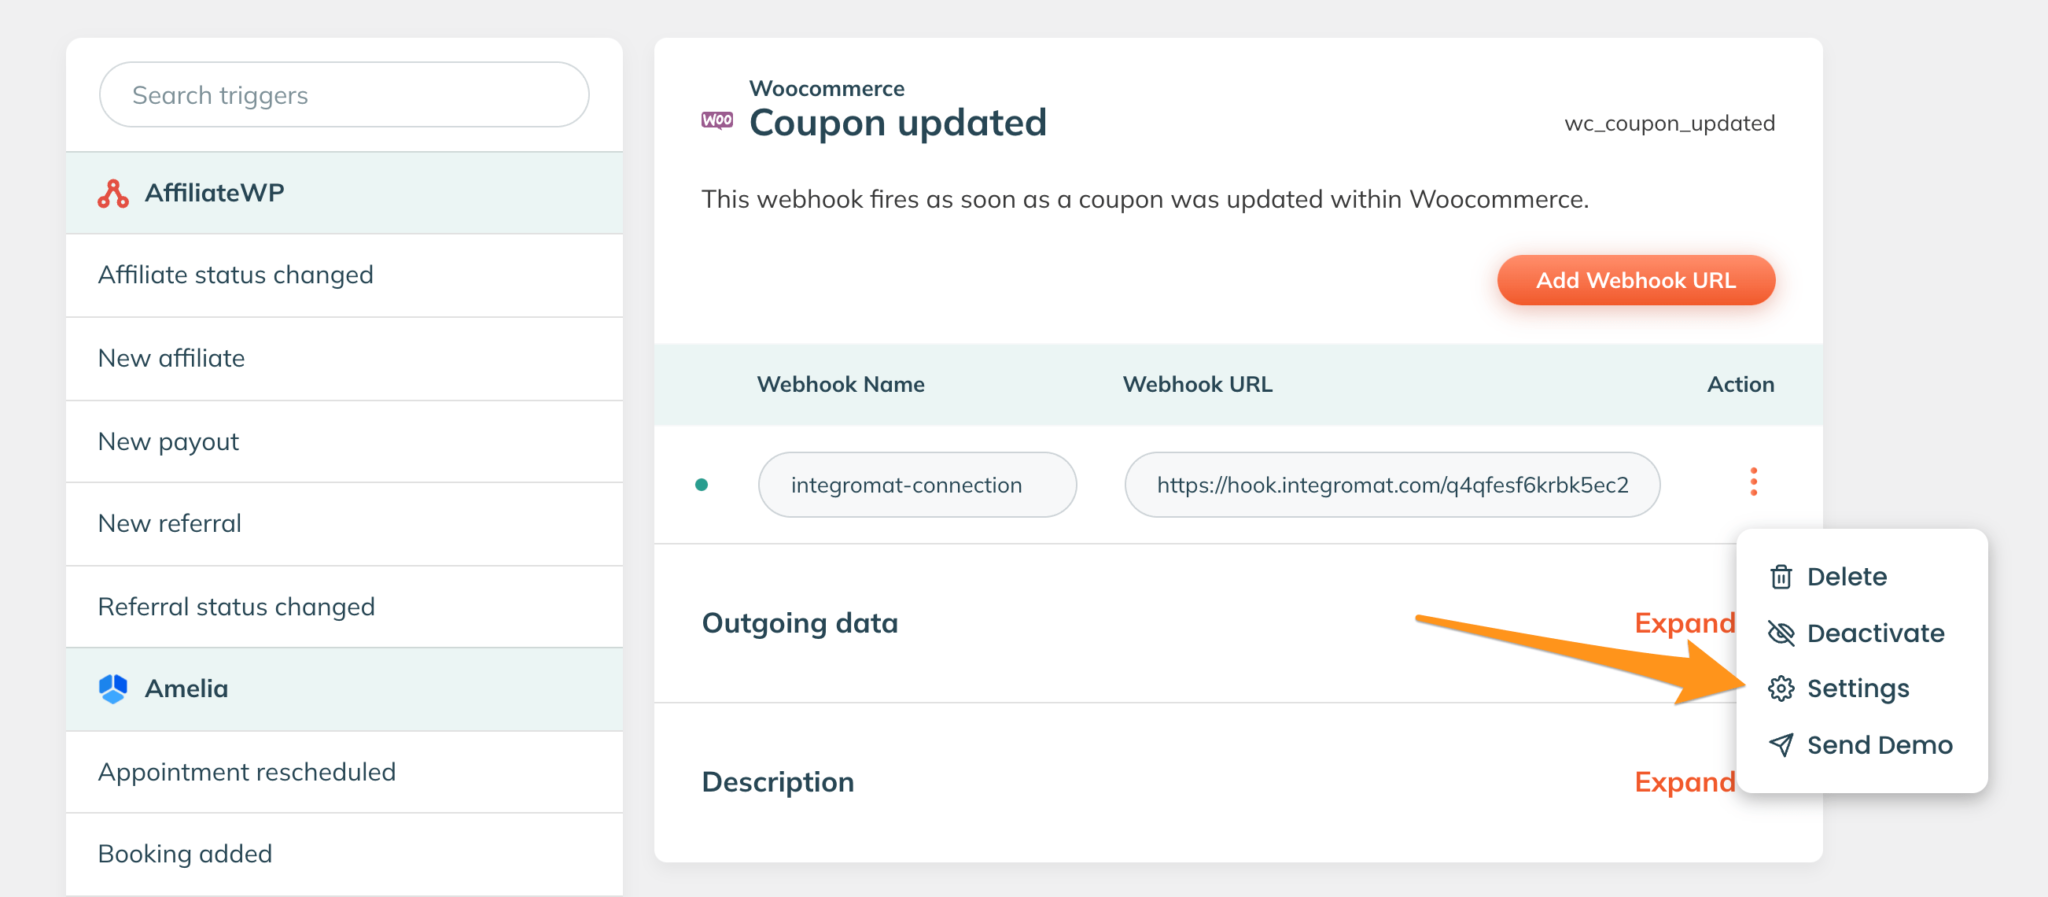 The WP Webhooks screen of the Assignment uploaded trigger